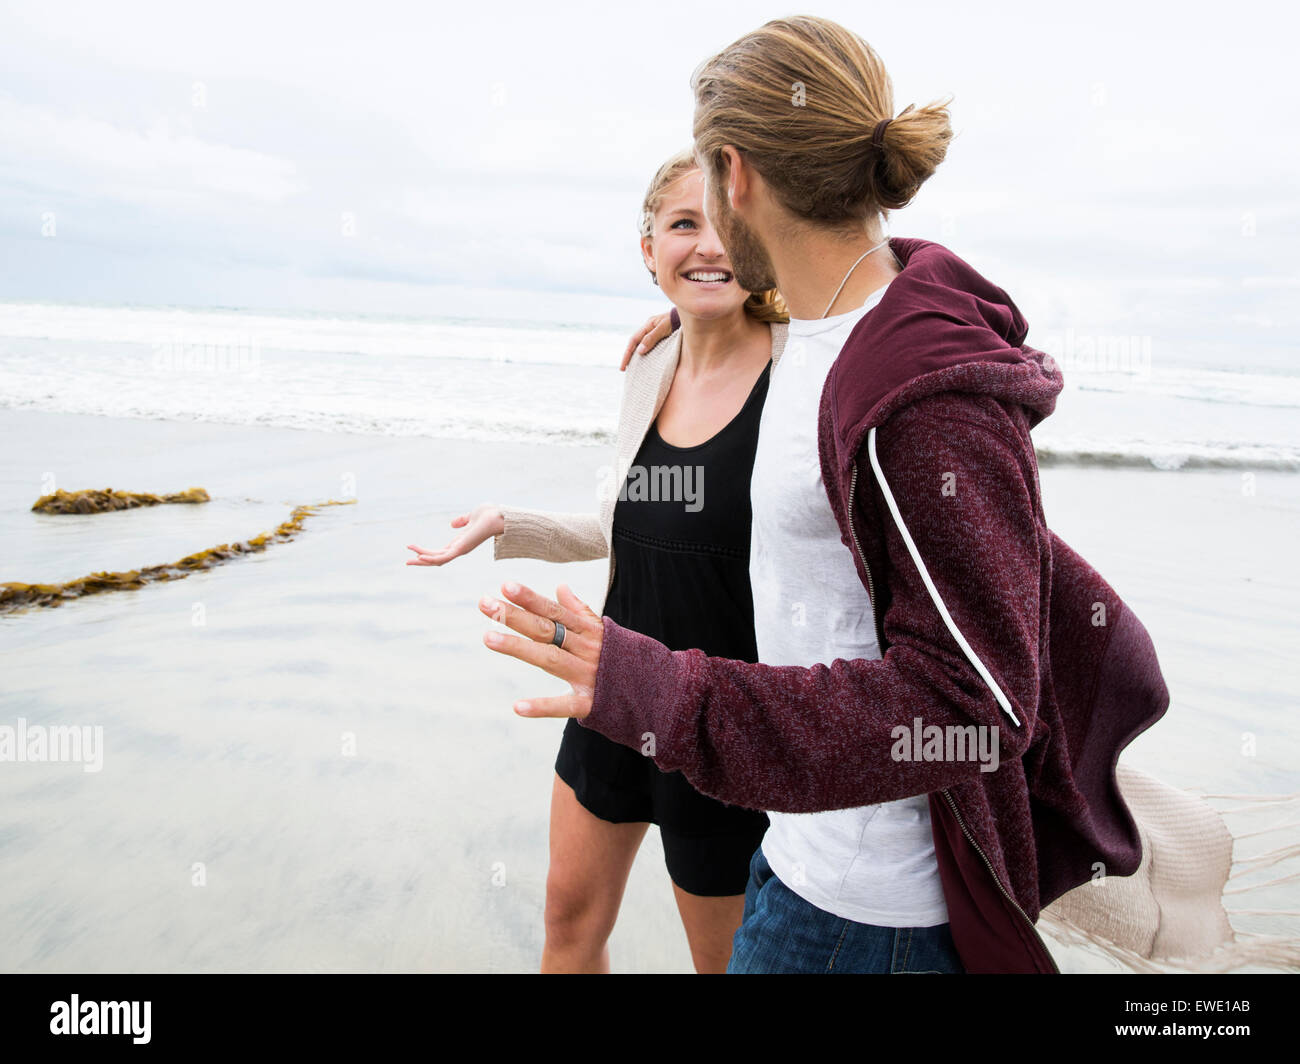 Young man and young woman walking on a beach, smiling Stock Photo